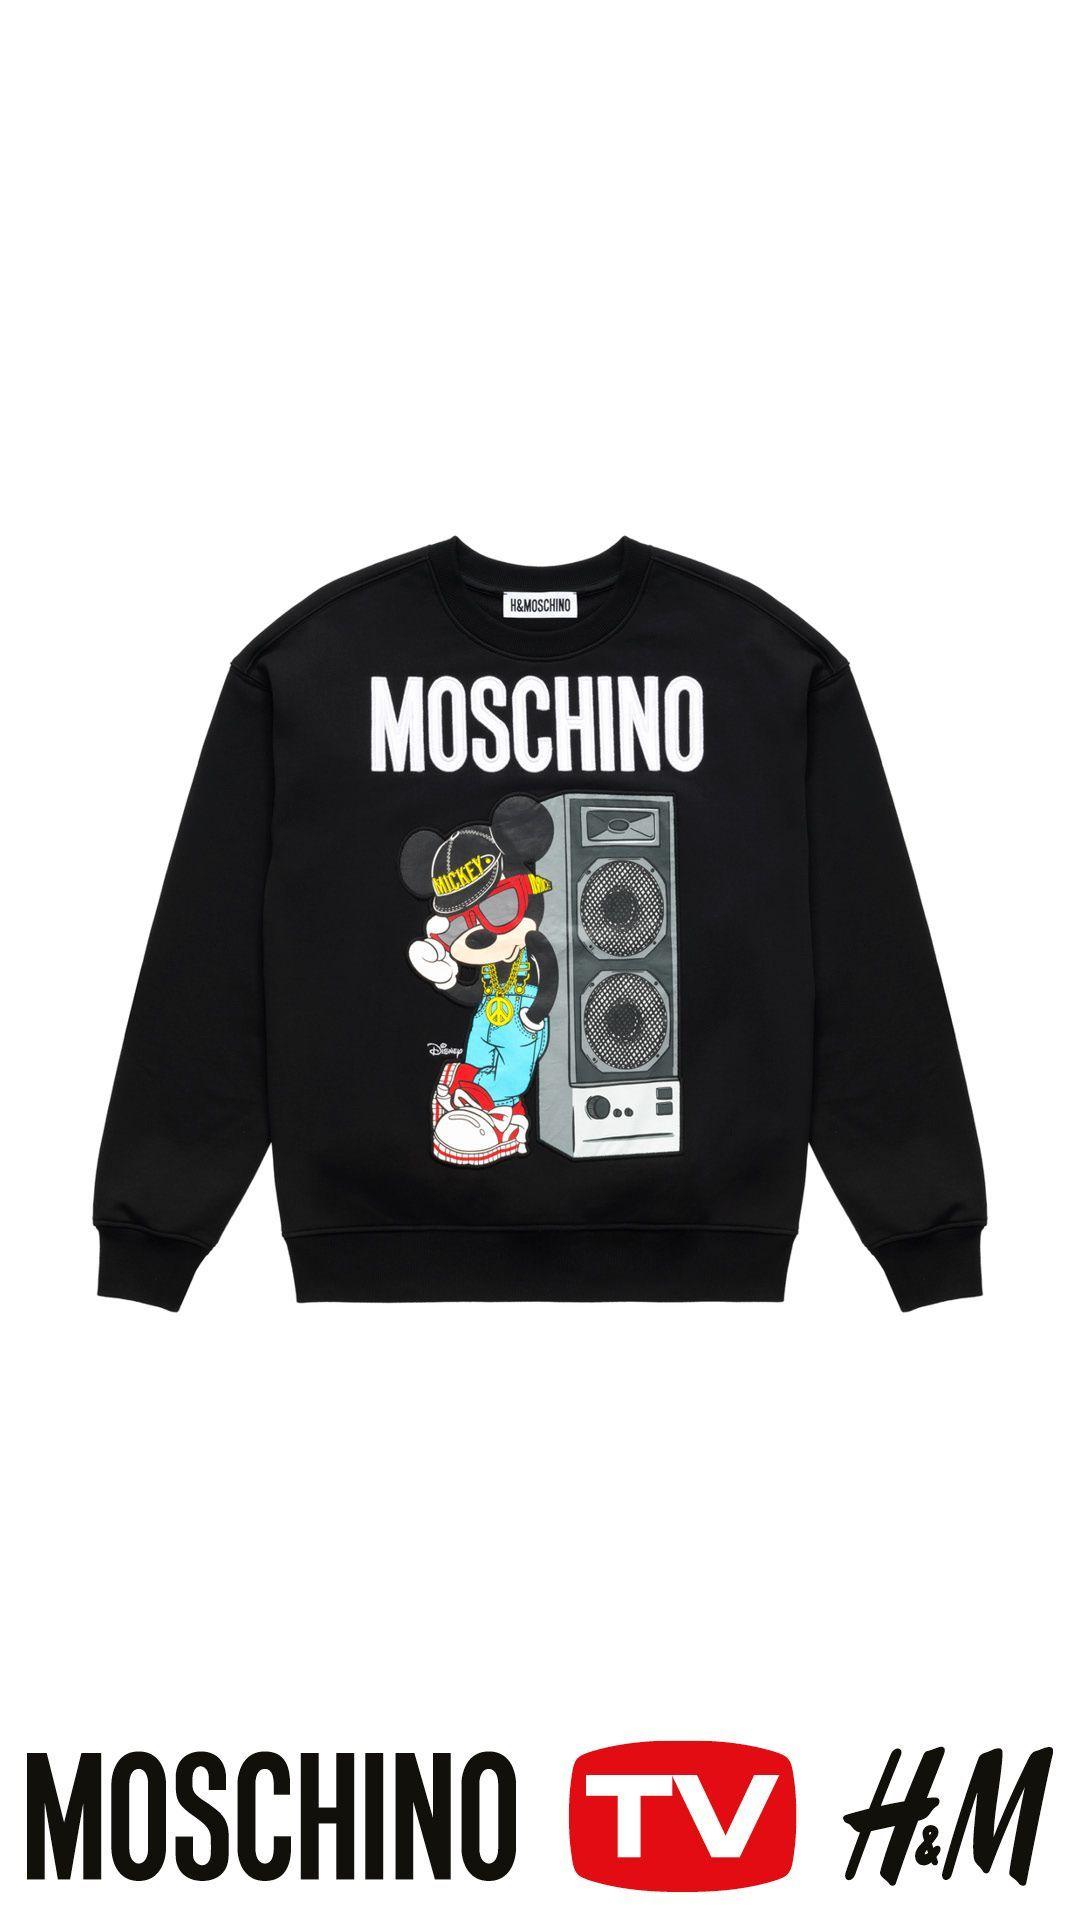 H&M Clothing Logo - MOSCHINO [tv] H&M features bold streetwear-inspired clothing and ...